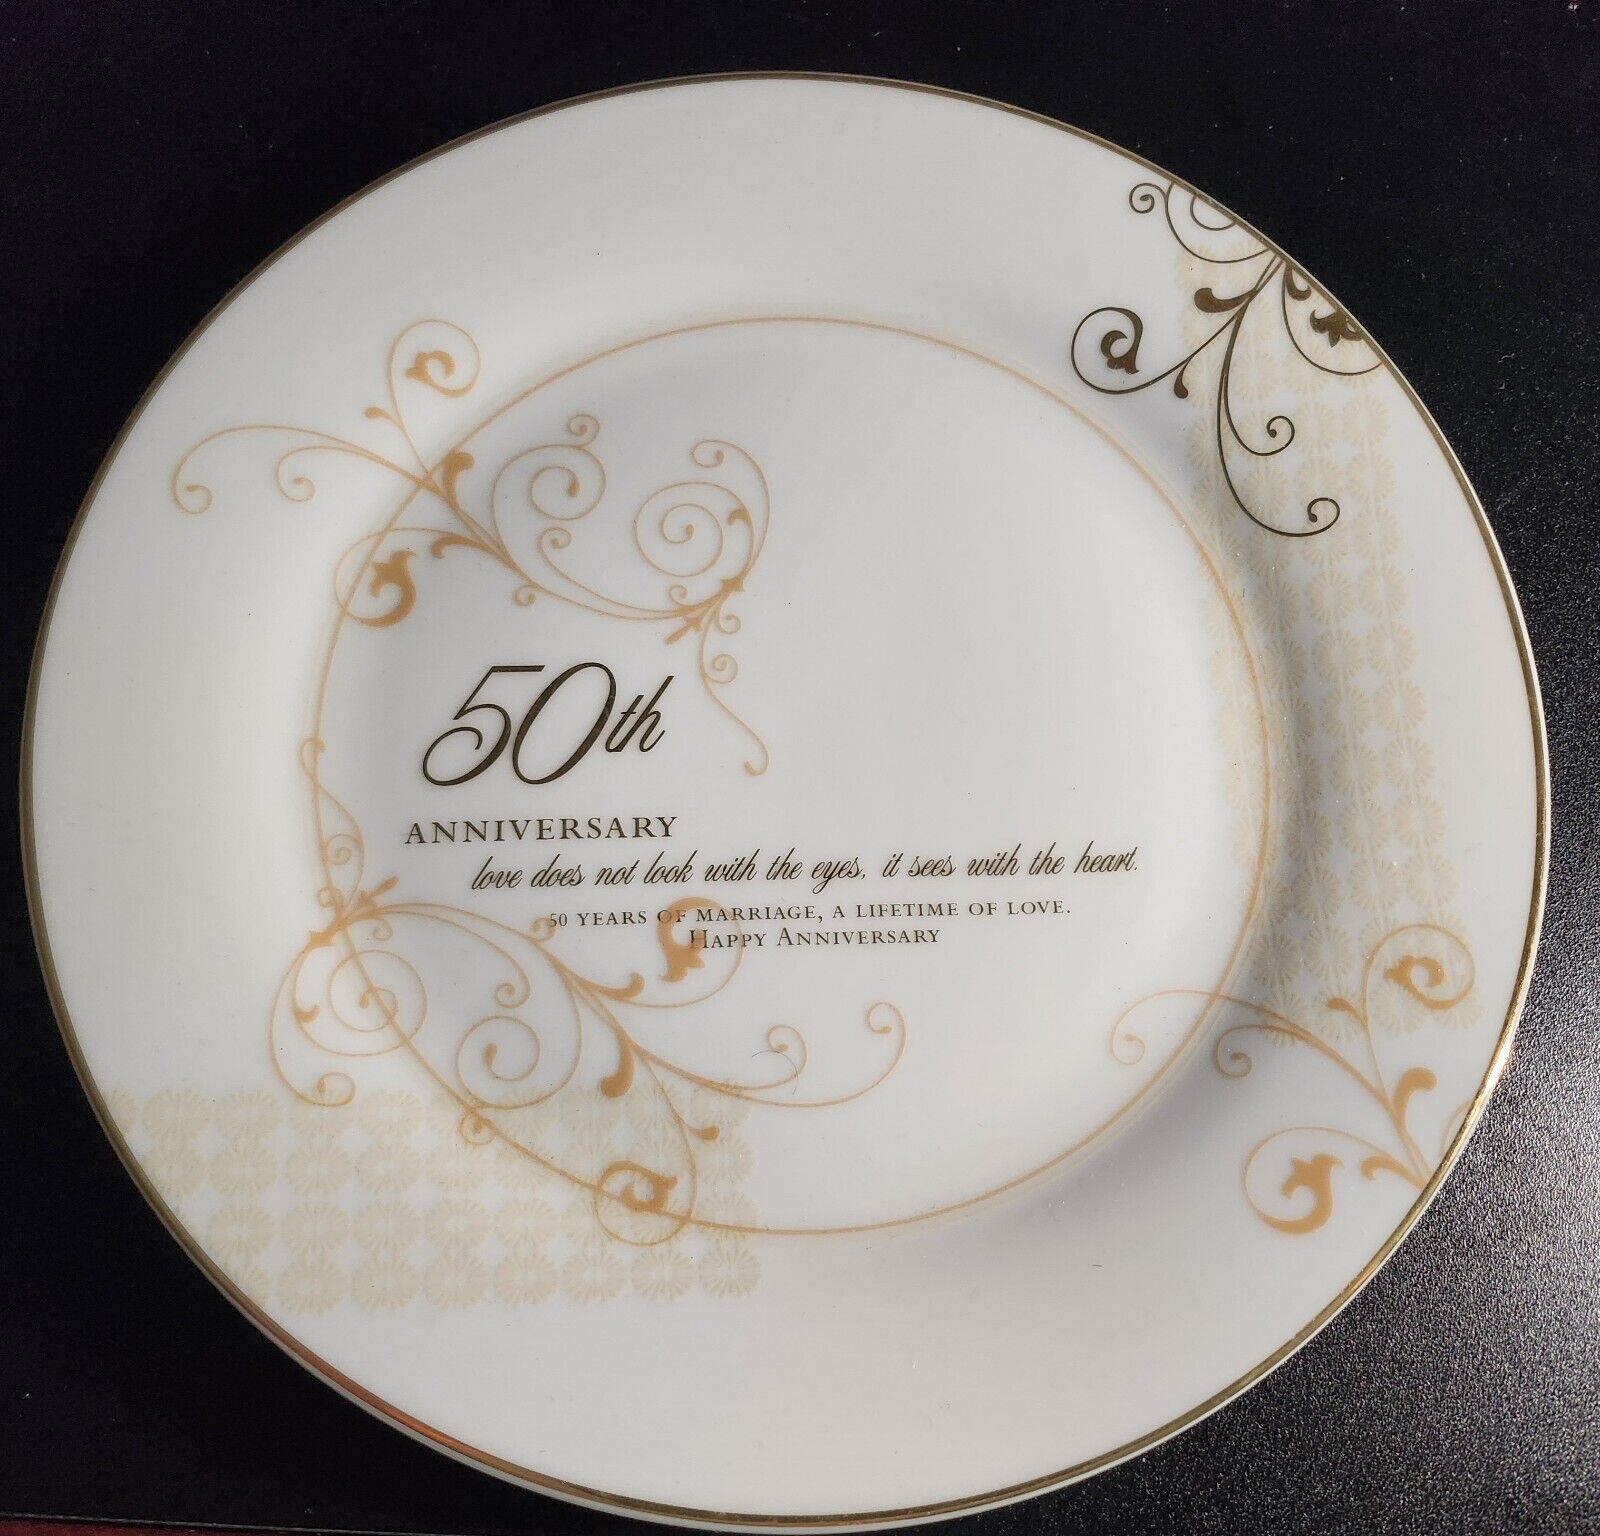 HAPPY 50TH ANNIVERSARY PLATE BRAND NEW WITH EASEL 